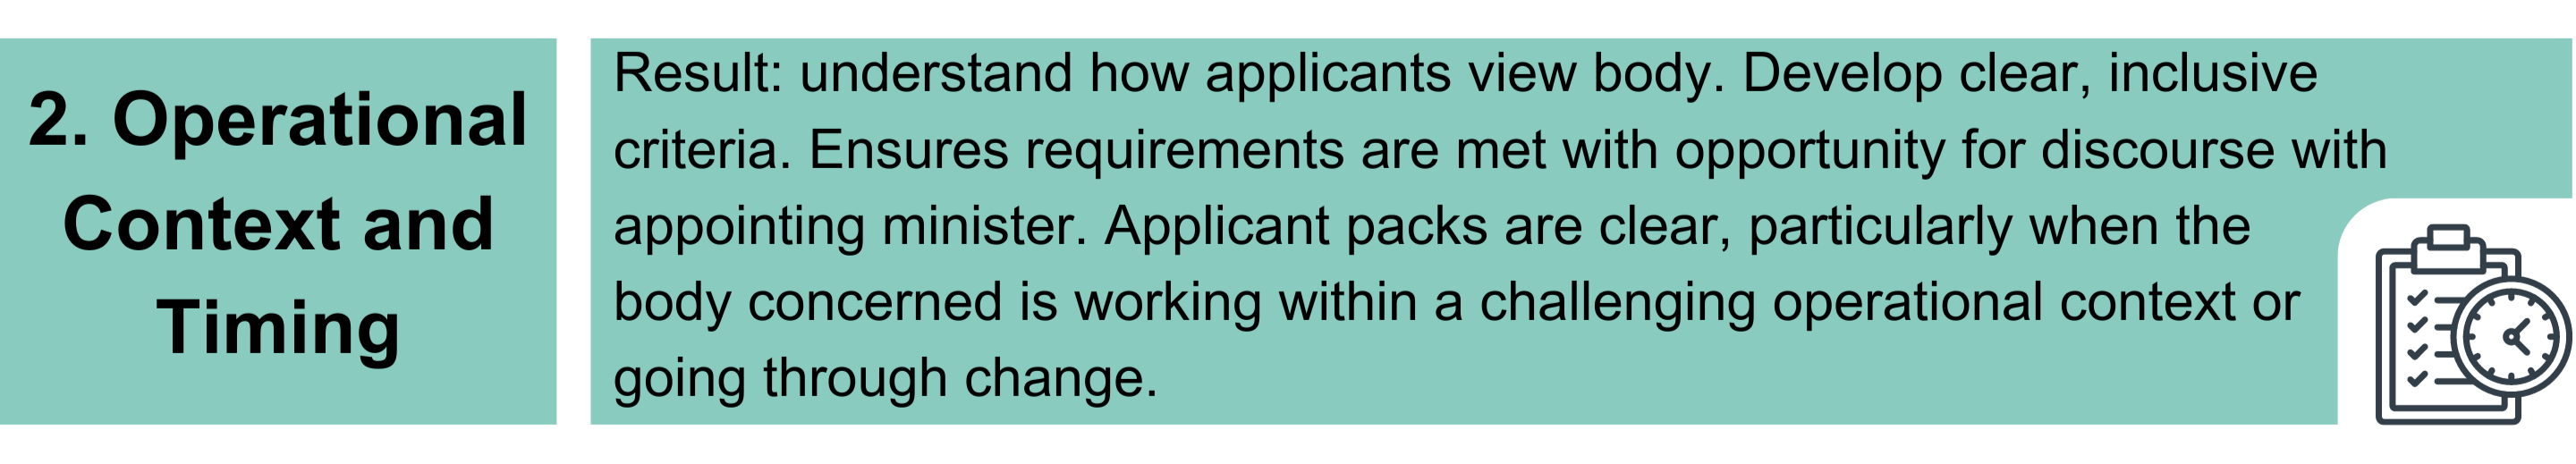 2. Operational Context and Timing. Result: understand how applicants view body. Develop clear, inclusive criteria. Ensures requirements are met with opportunity for discourse with appointing minister. Applicant packs are clear, particularly when the body concerned is working within a challenging operational context or going through change.